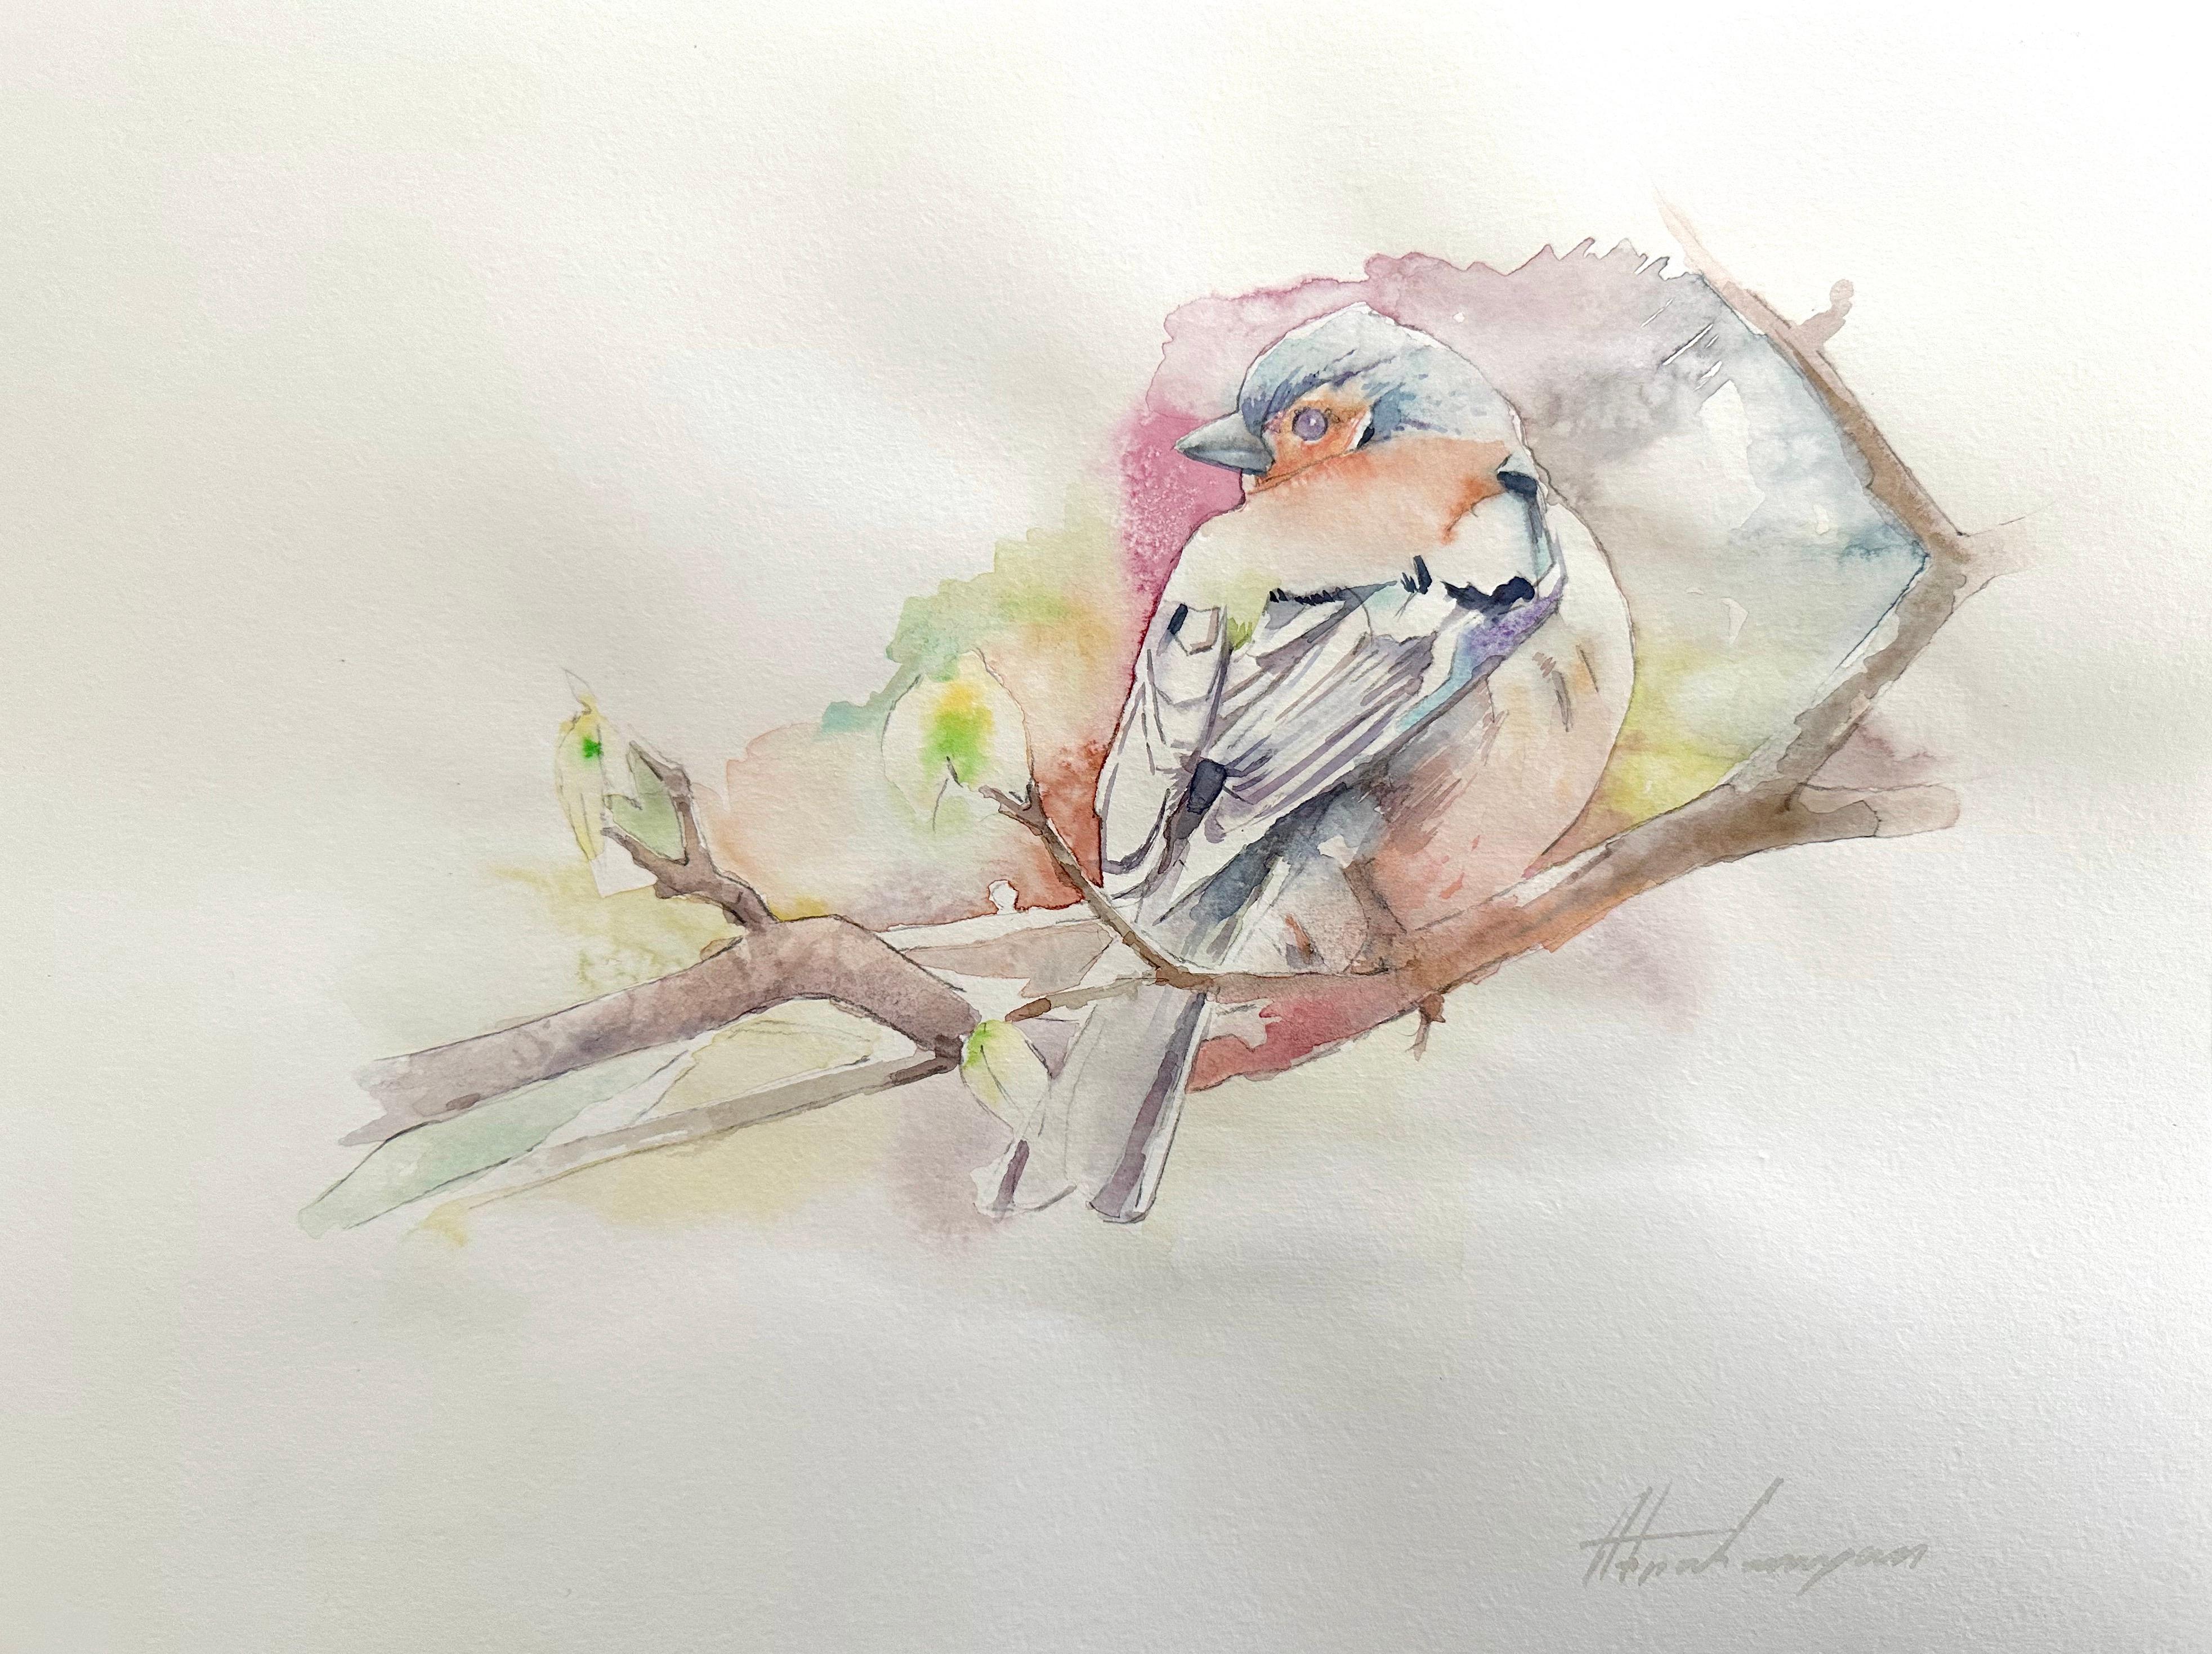 Artyom Abrahamyan Animal Art - Chaffinch, Bird, Watercolor Handmade Painting, One of a Kind